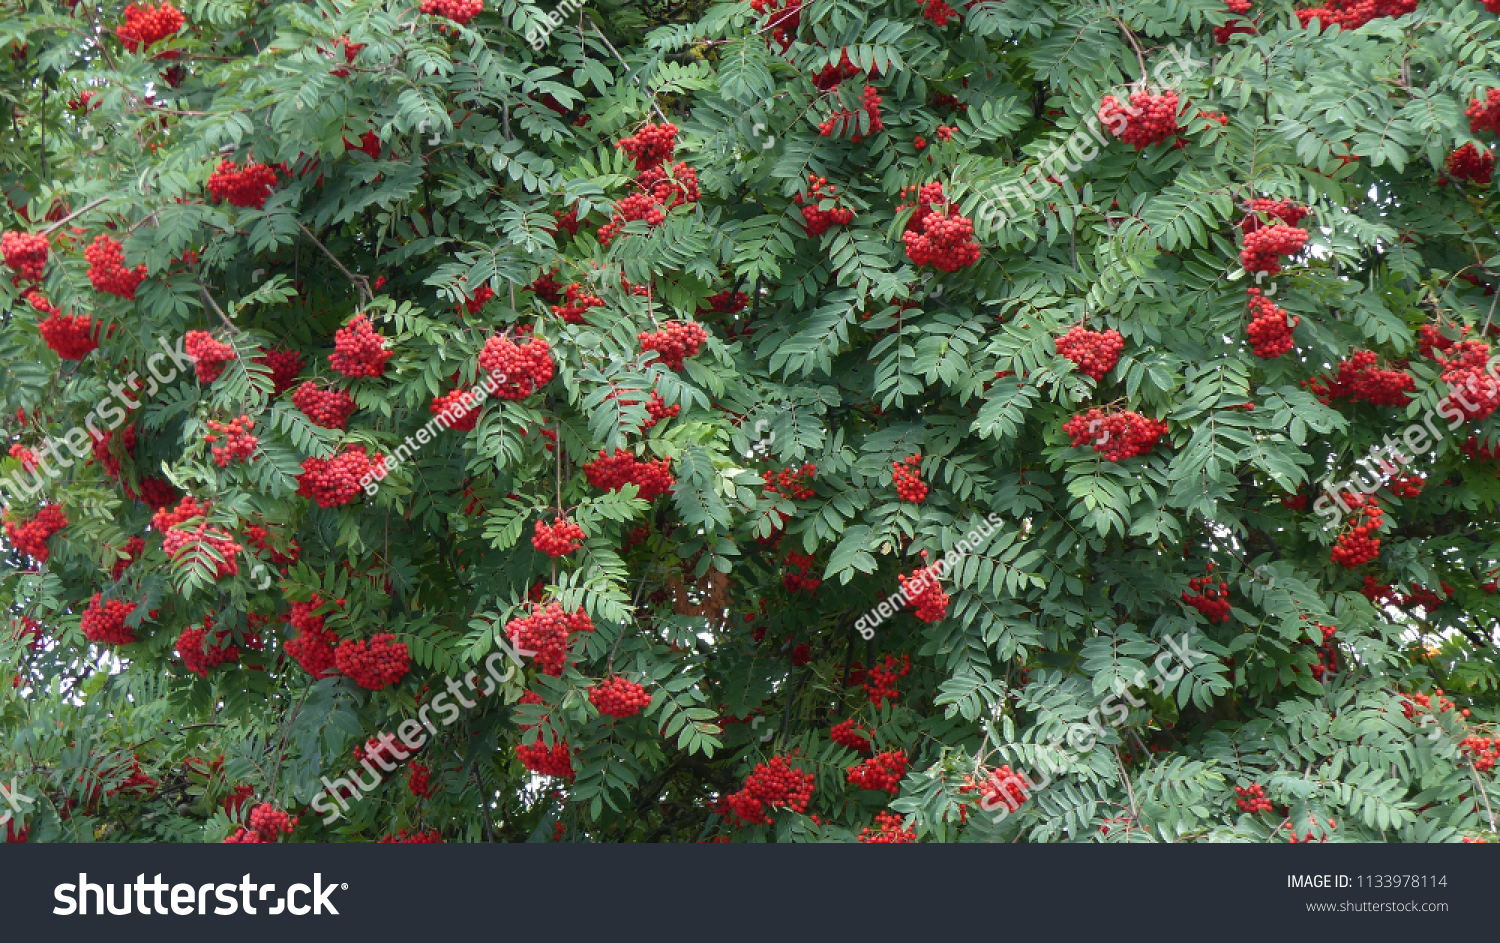 Sorbus aucuparia, commonly called rowan and mountain-ash, is a species of deciduous tree or shrub in the rose family. #1133978114